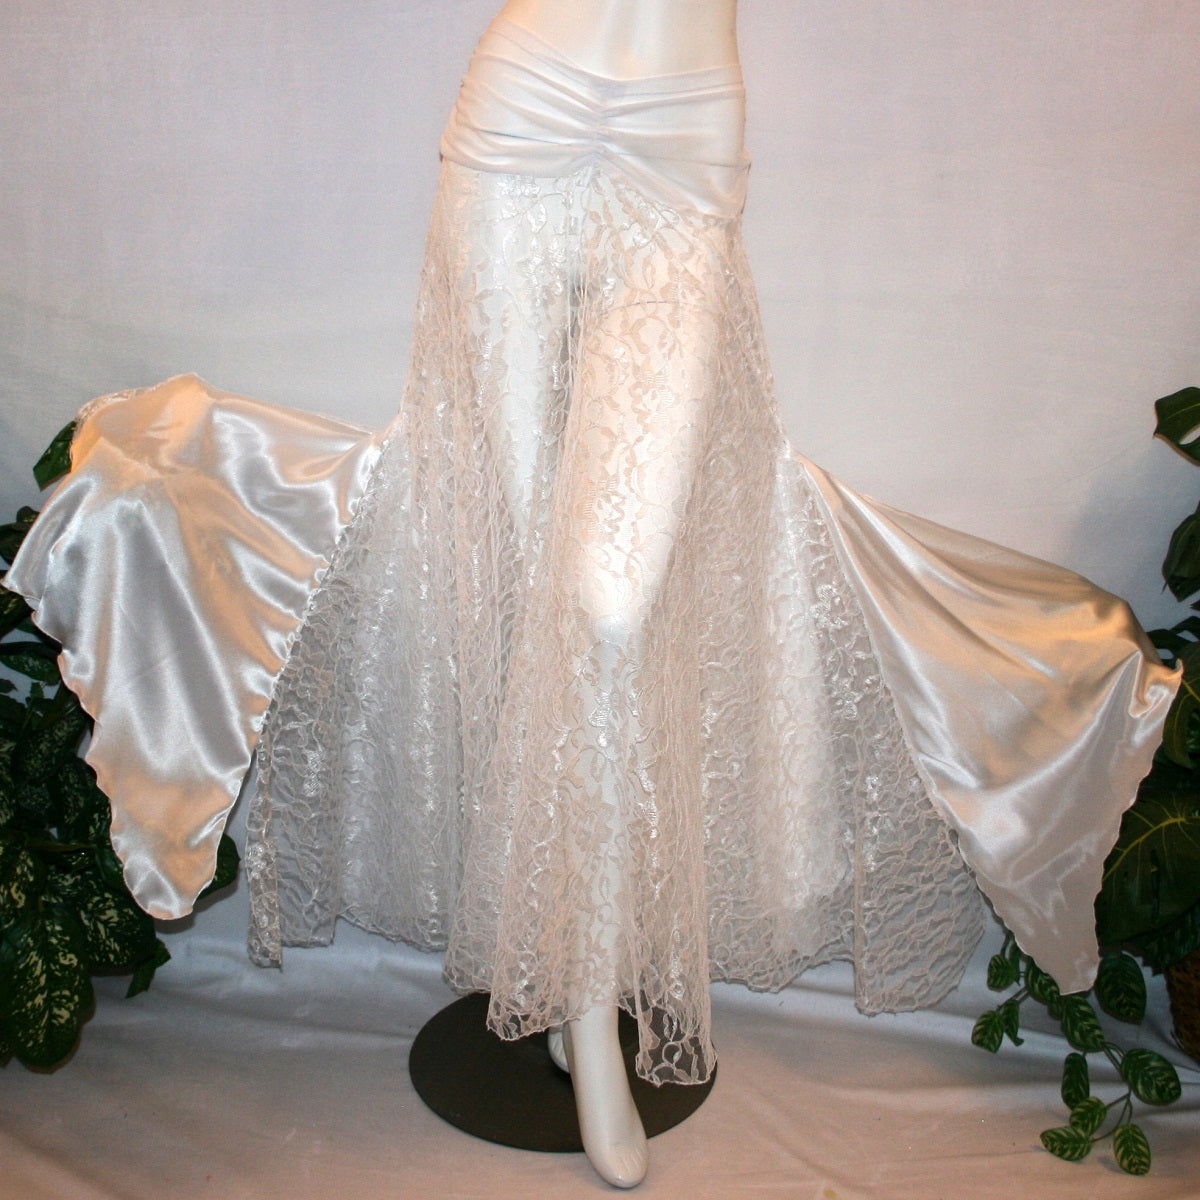 flaired view of White ballroom skirt created of yards of white lace with a white sheer stretch mesh ruched hip band, has inset panels & floats of white stretch satin.